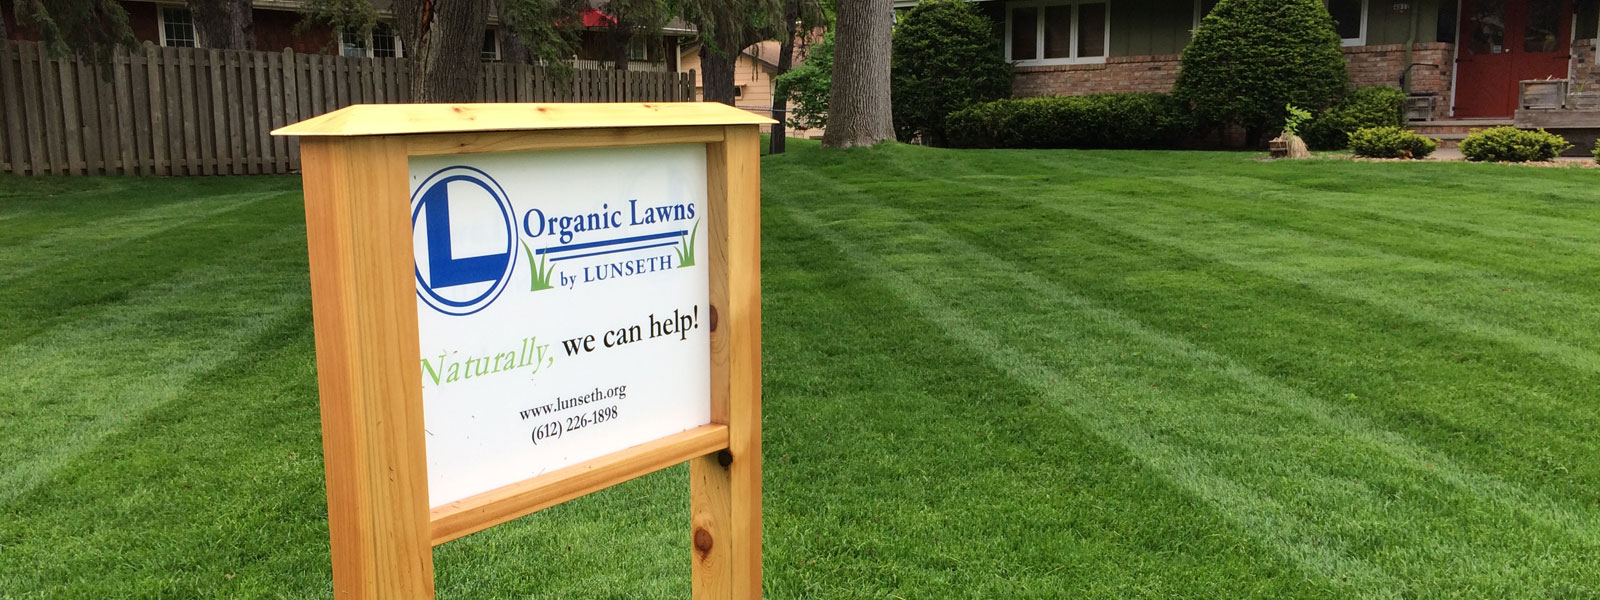 A wooden Organic Lawns by Lunseth sign in a front lawn